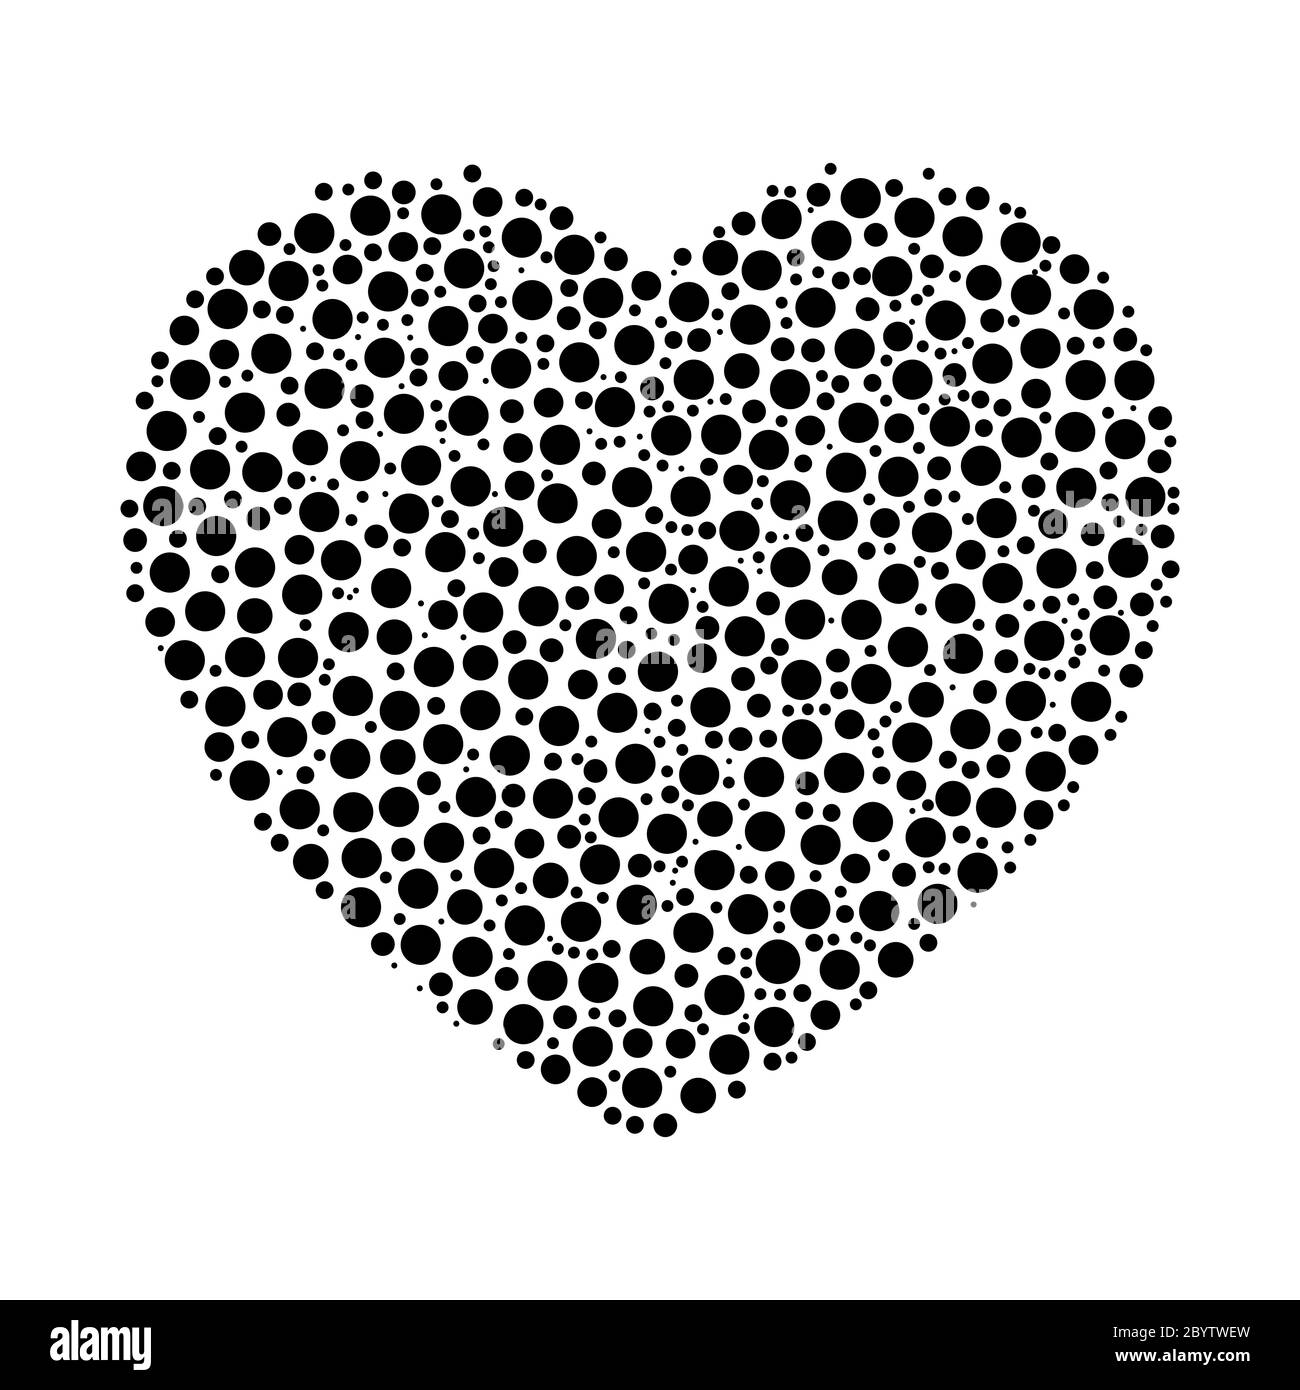 Heart mosaic of black dots. Vector illustration on white background. Stock Vector